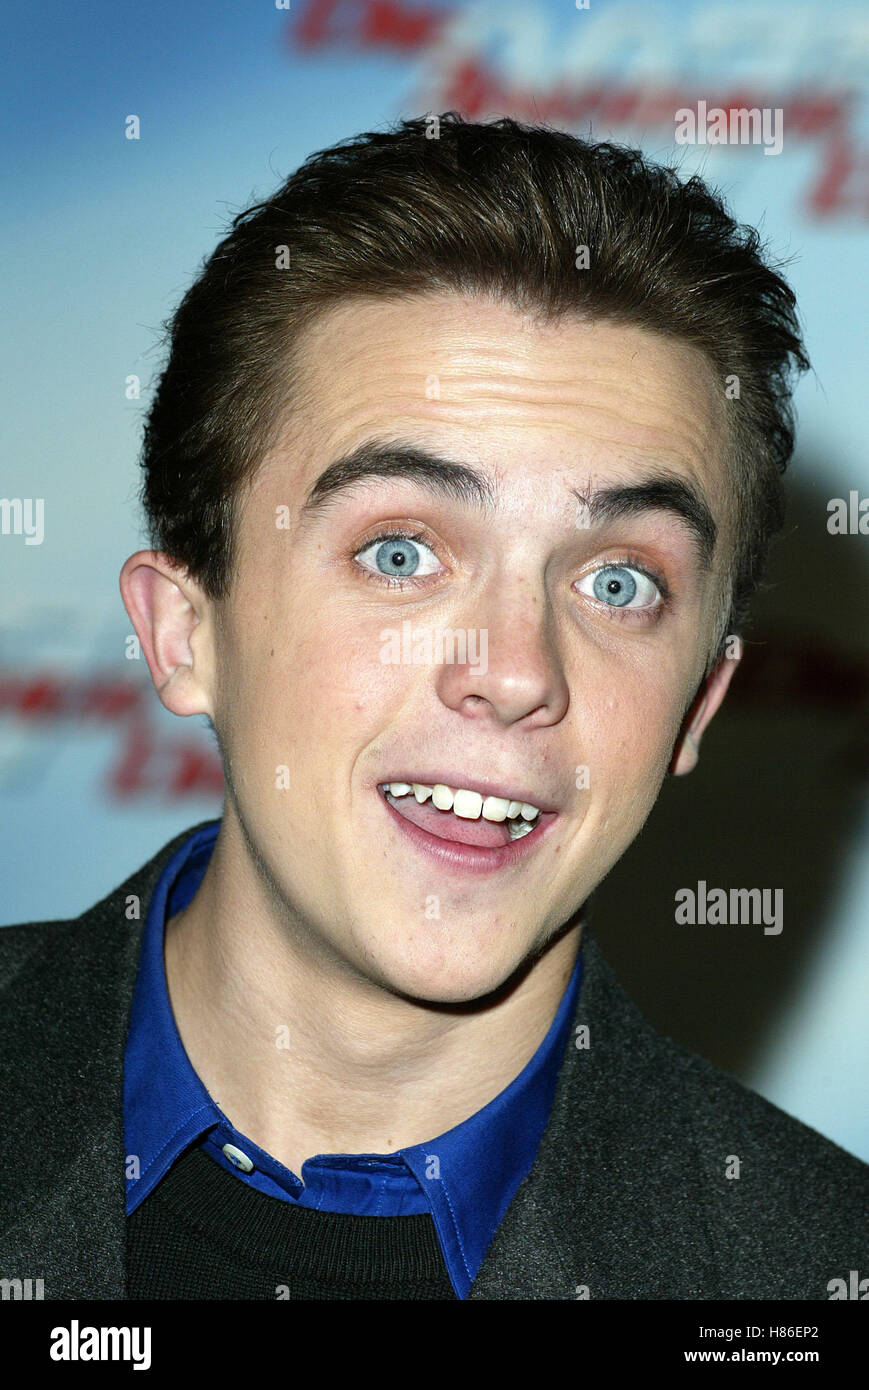 Frankie muniz los angeles usa hi-res stock photography and images - Alamy